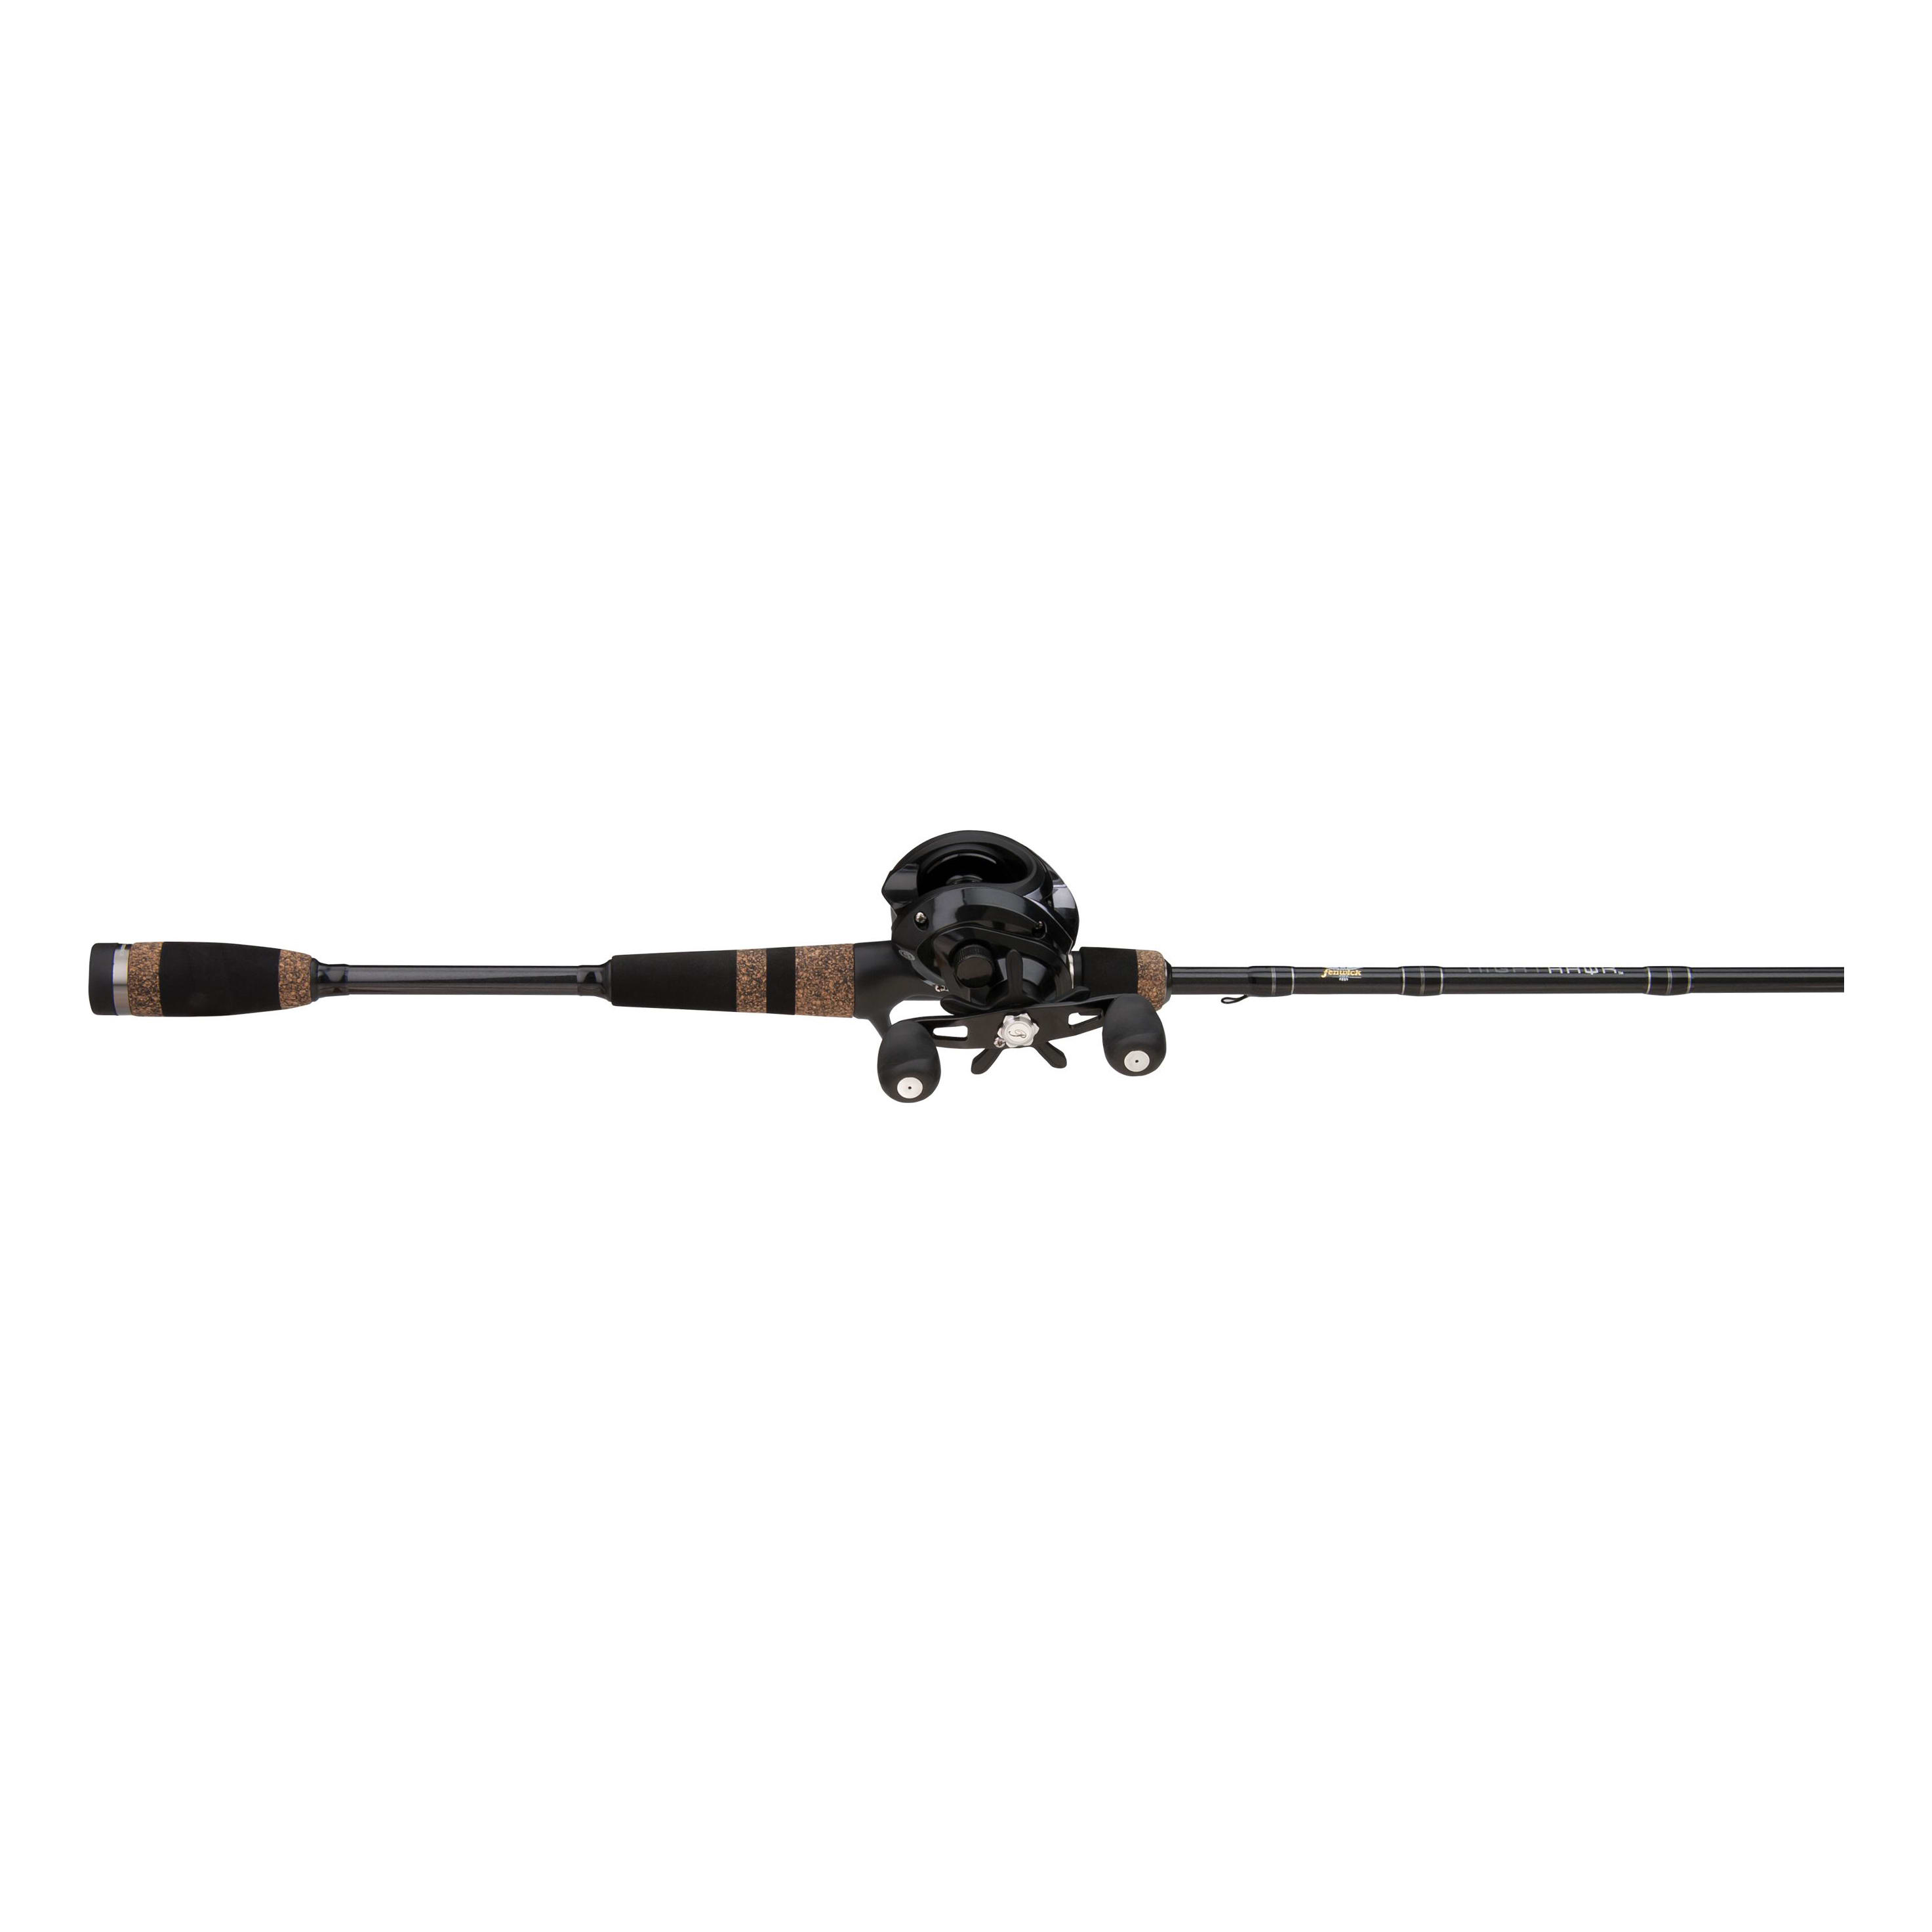 Anglers image double zinger – Baxter House River Outfitters